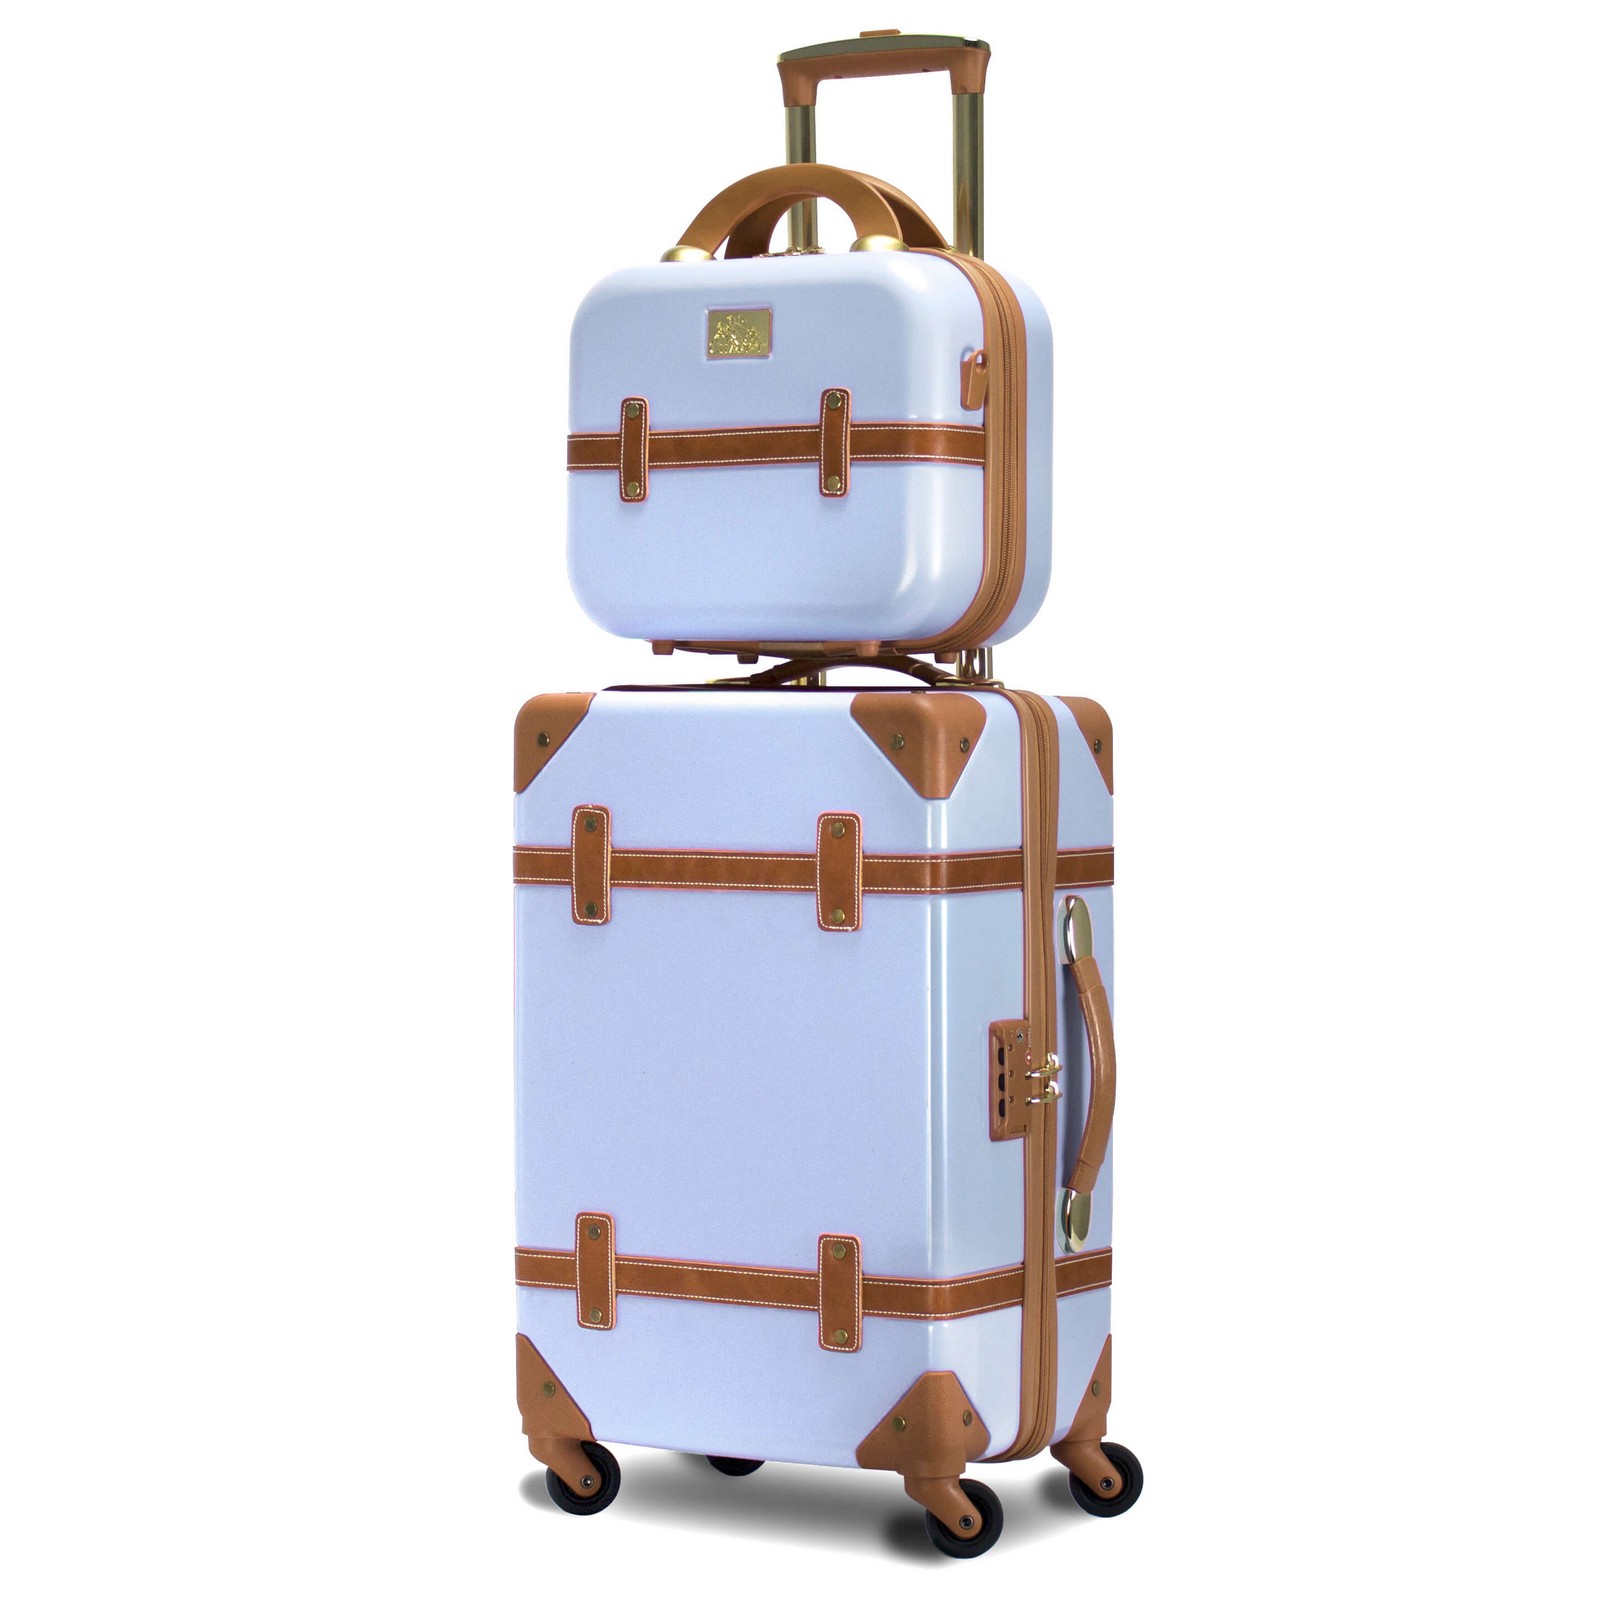 Chariot Gatsby 2-Piece Hardside Carry-On Luggage Set - Ice Blue - image 1 of 6